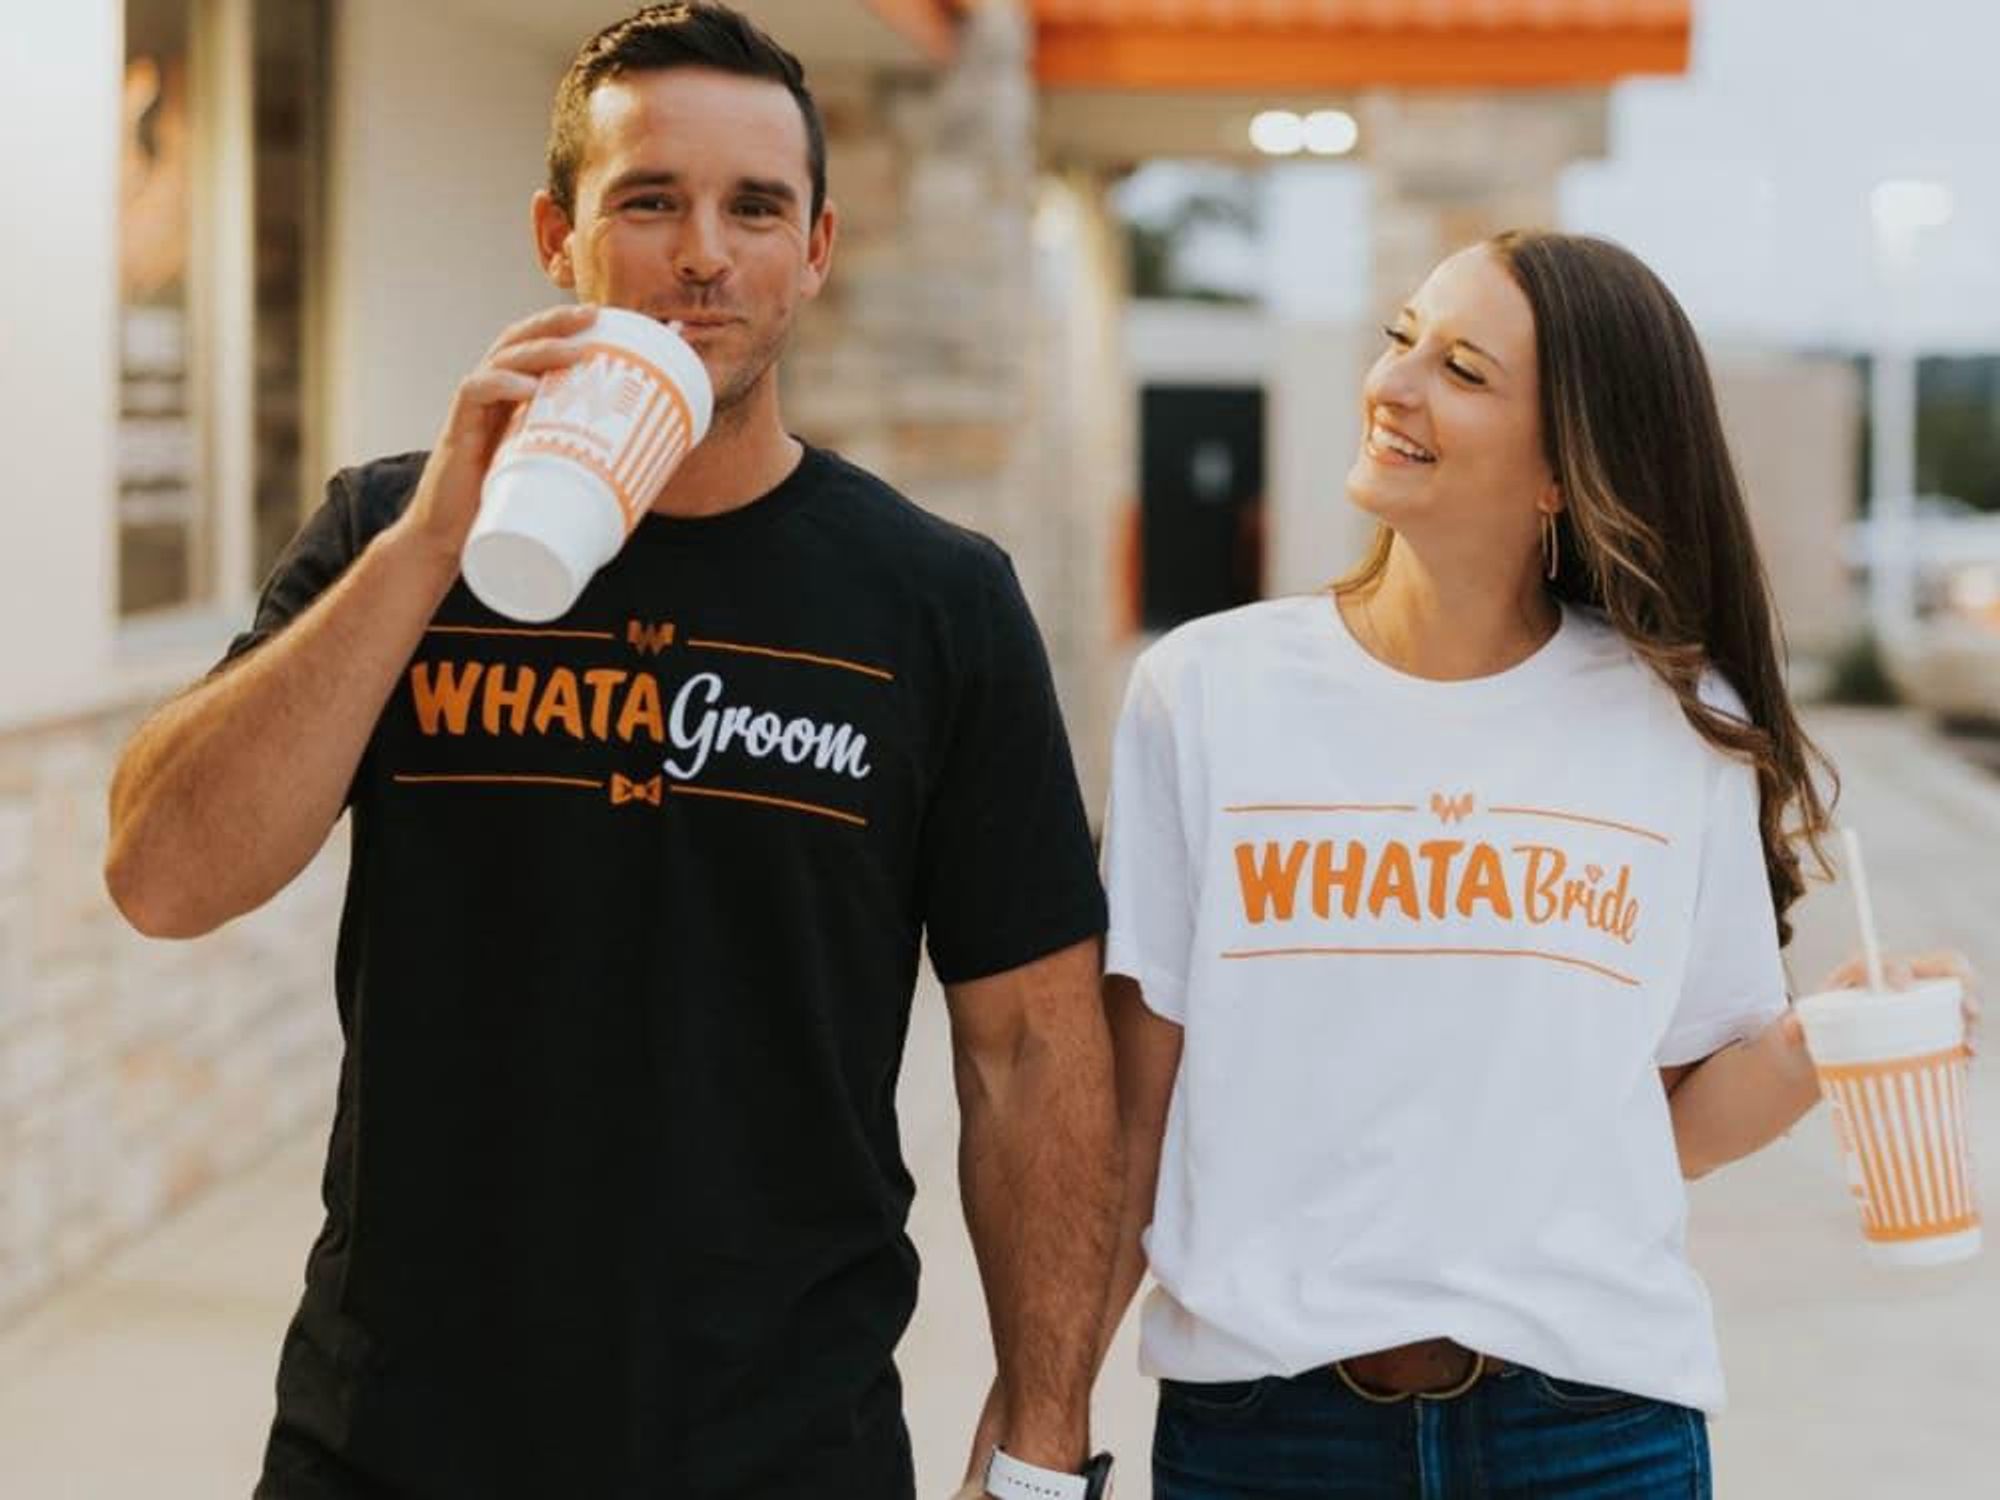 Whataburger and couples: a match made in burger heaven.